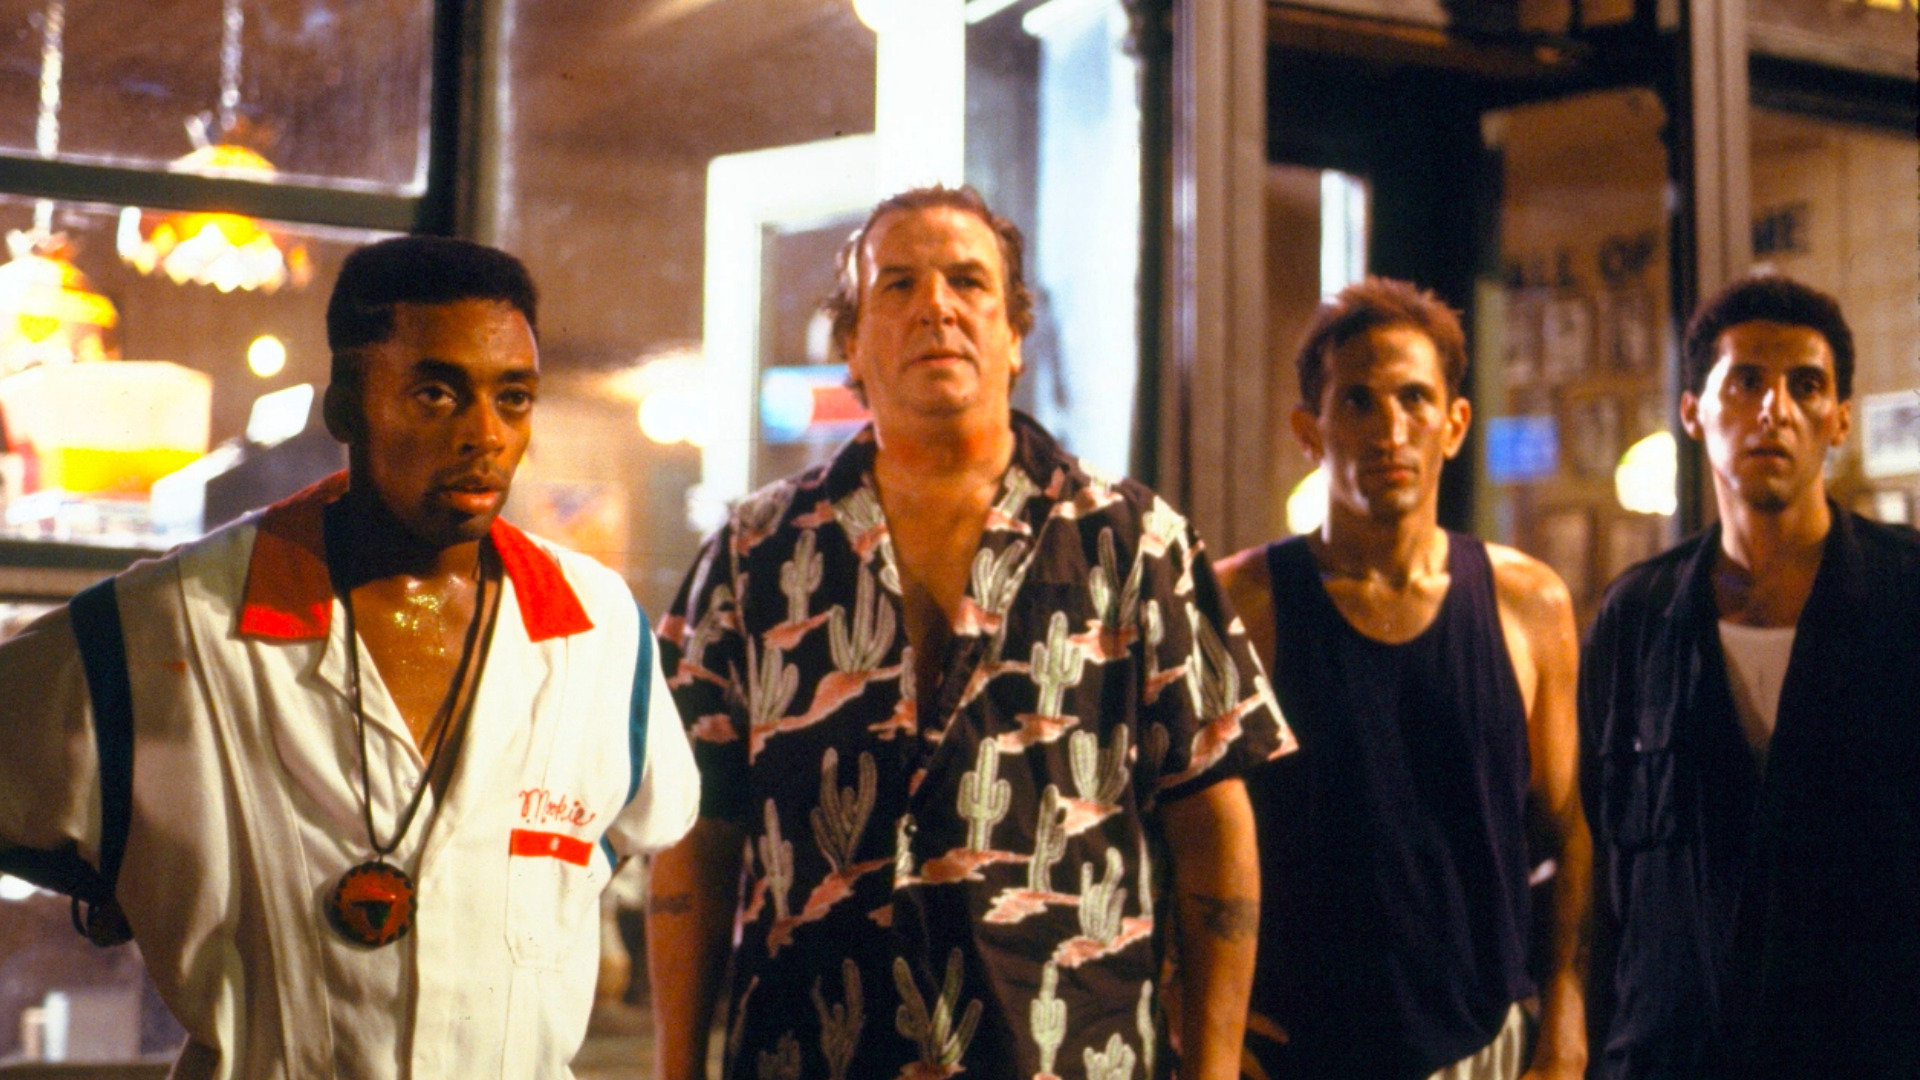 Looking back on the significance of 1989 film, “Do the Right Thing”